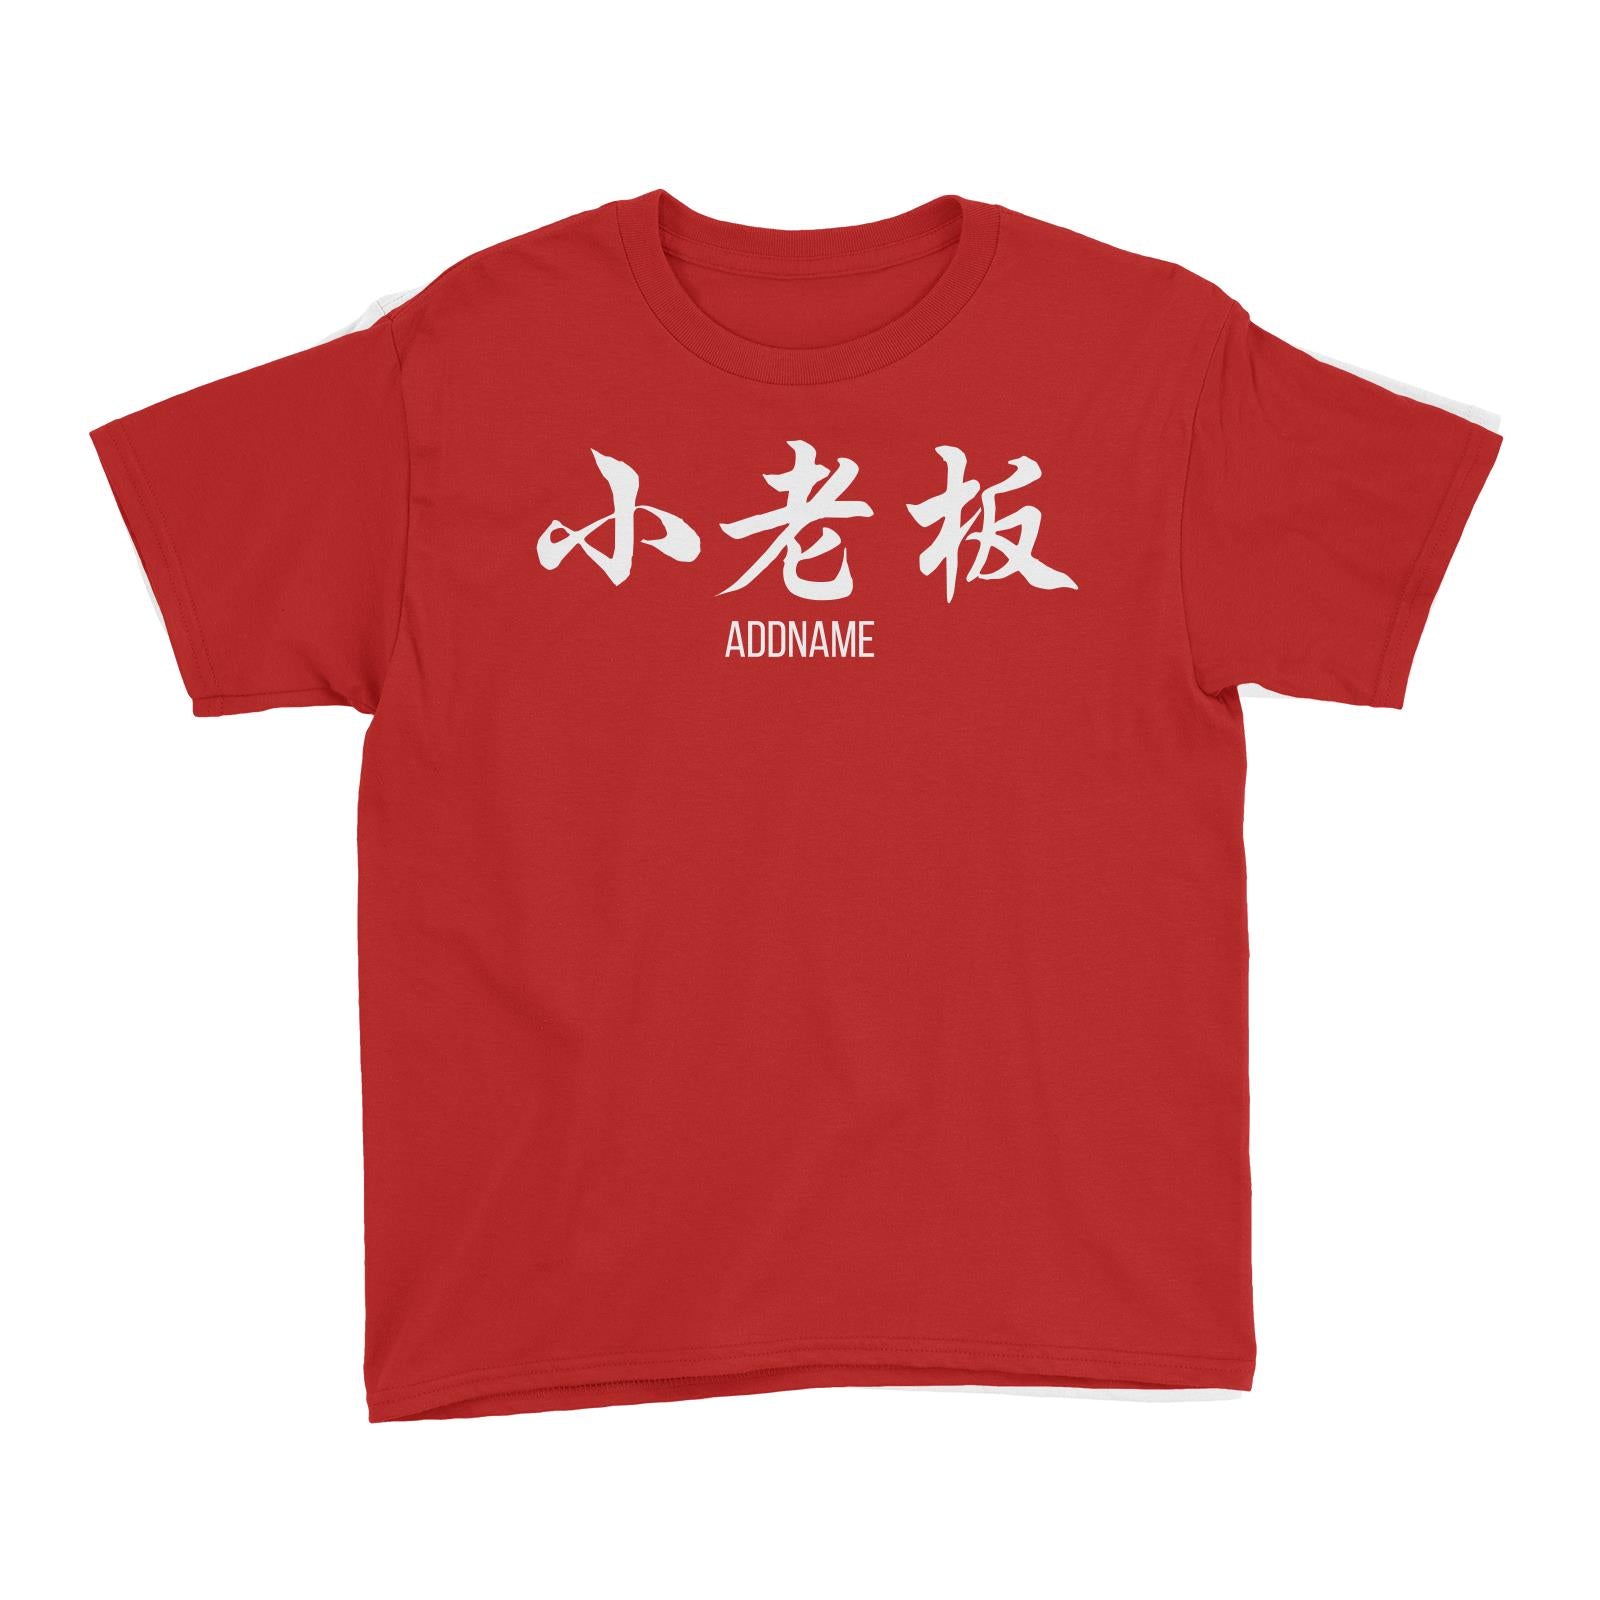 Small Boss in Chinese Calligraphy Kid's T-Shirt